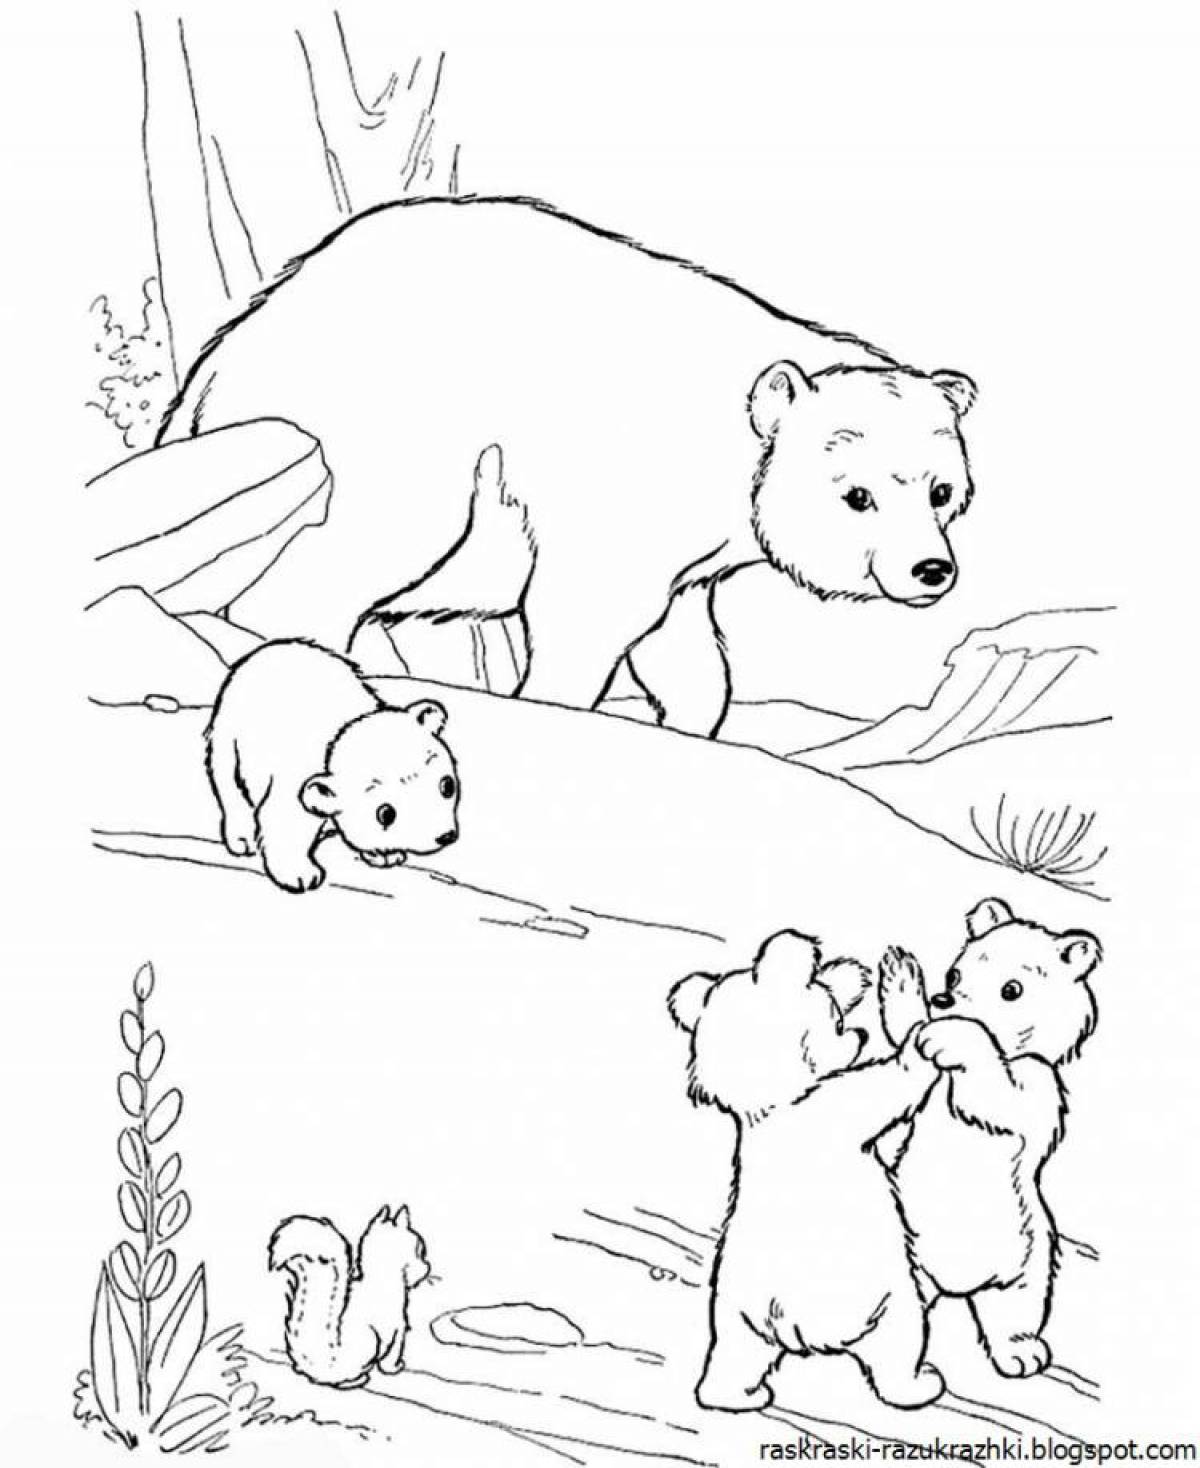 Coloring book inquisitive bear for kids